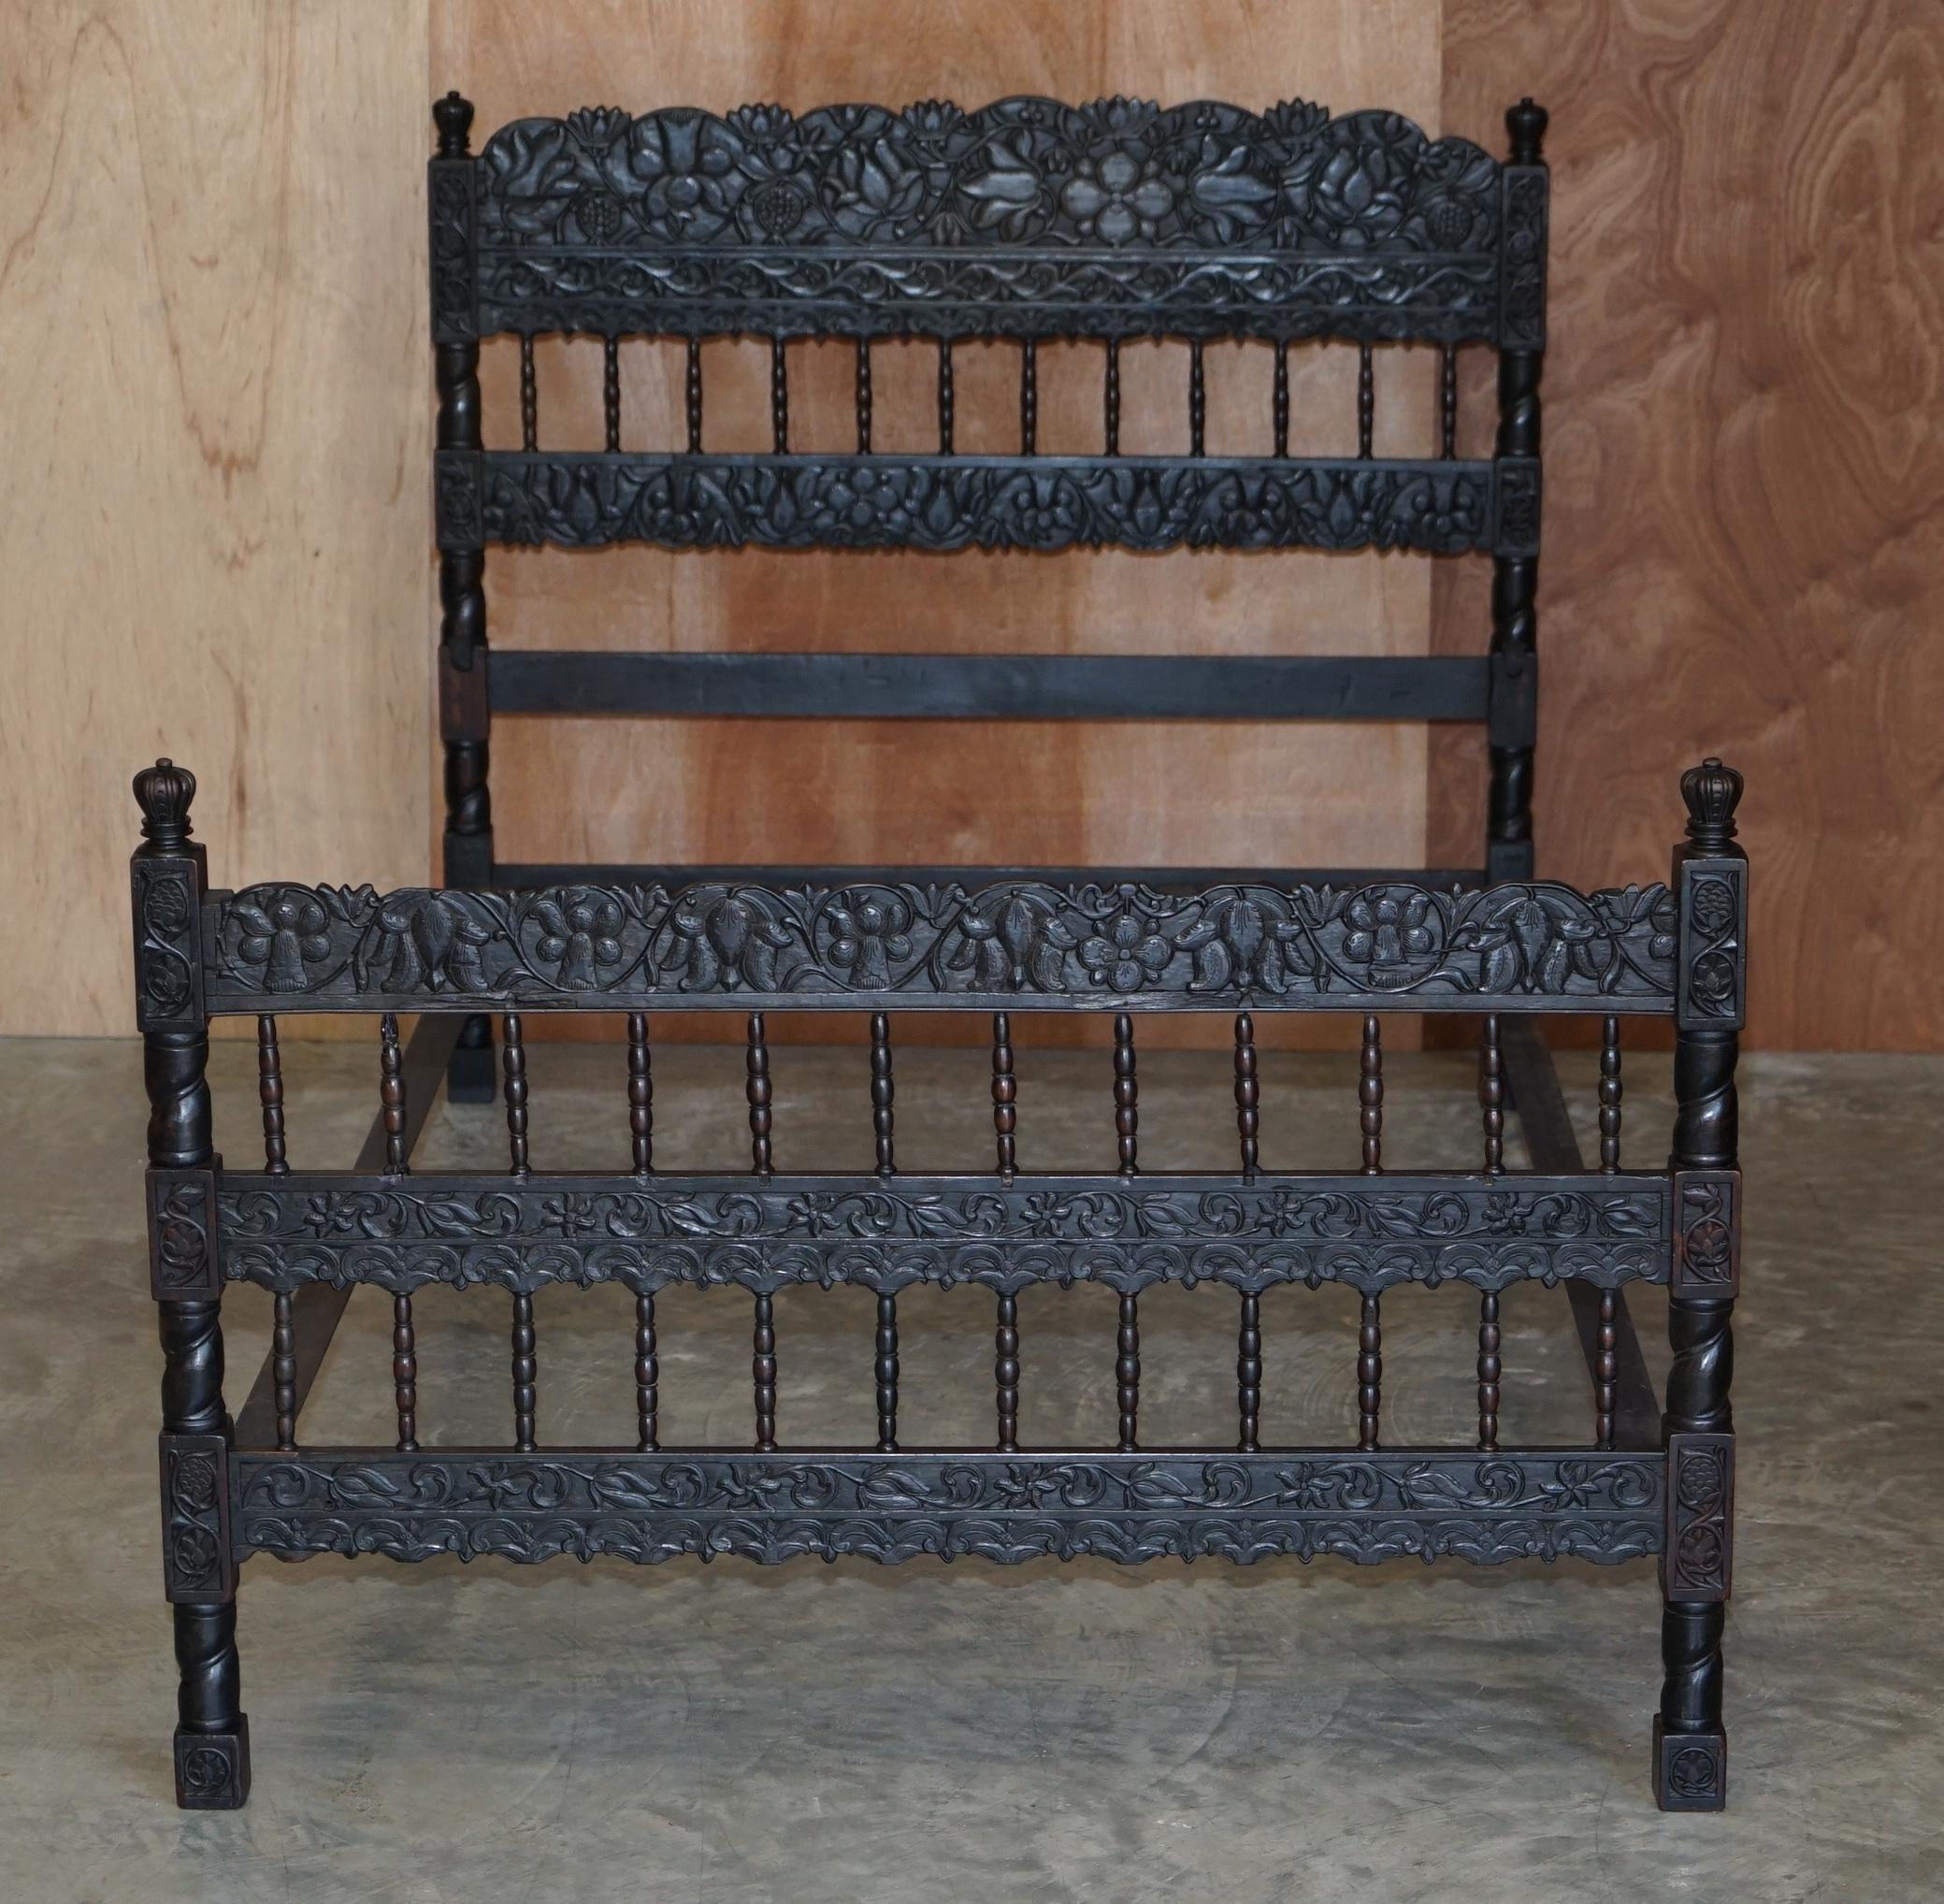 We are delighted to offer for sale this very rare highly collectable ornately carved Anglo Indian hardwood bed frame

A very rare circa 1880-1900 Anglo Indian Export heavily carved frame. The head and footboards are a tour de force of original